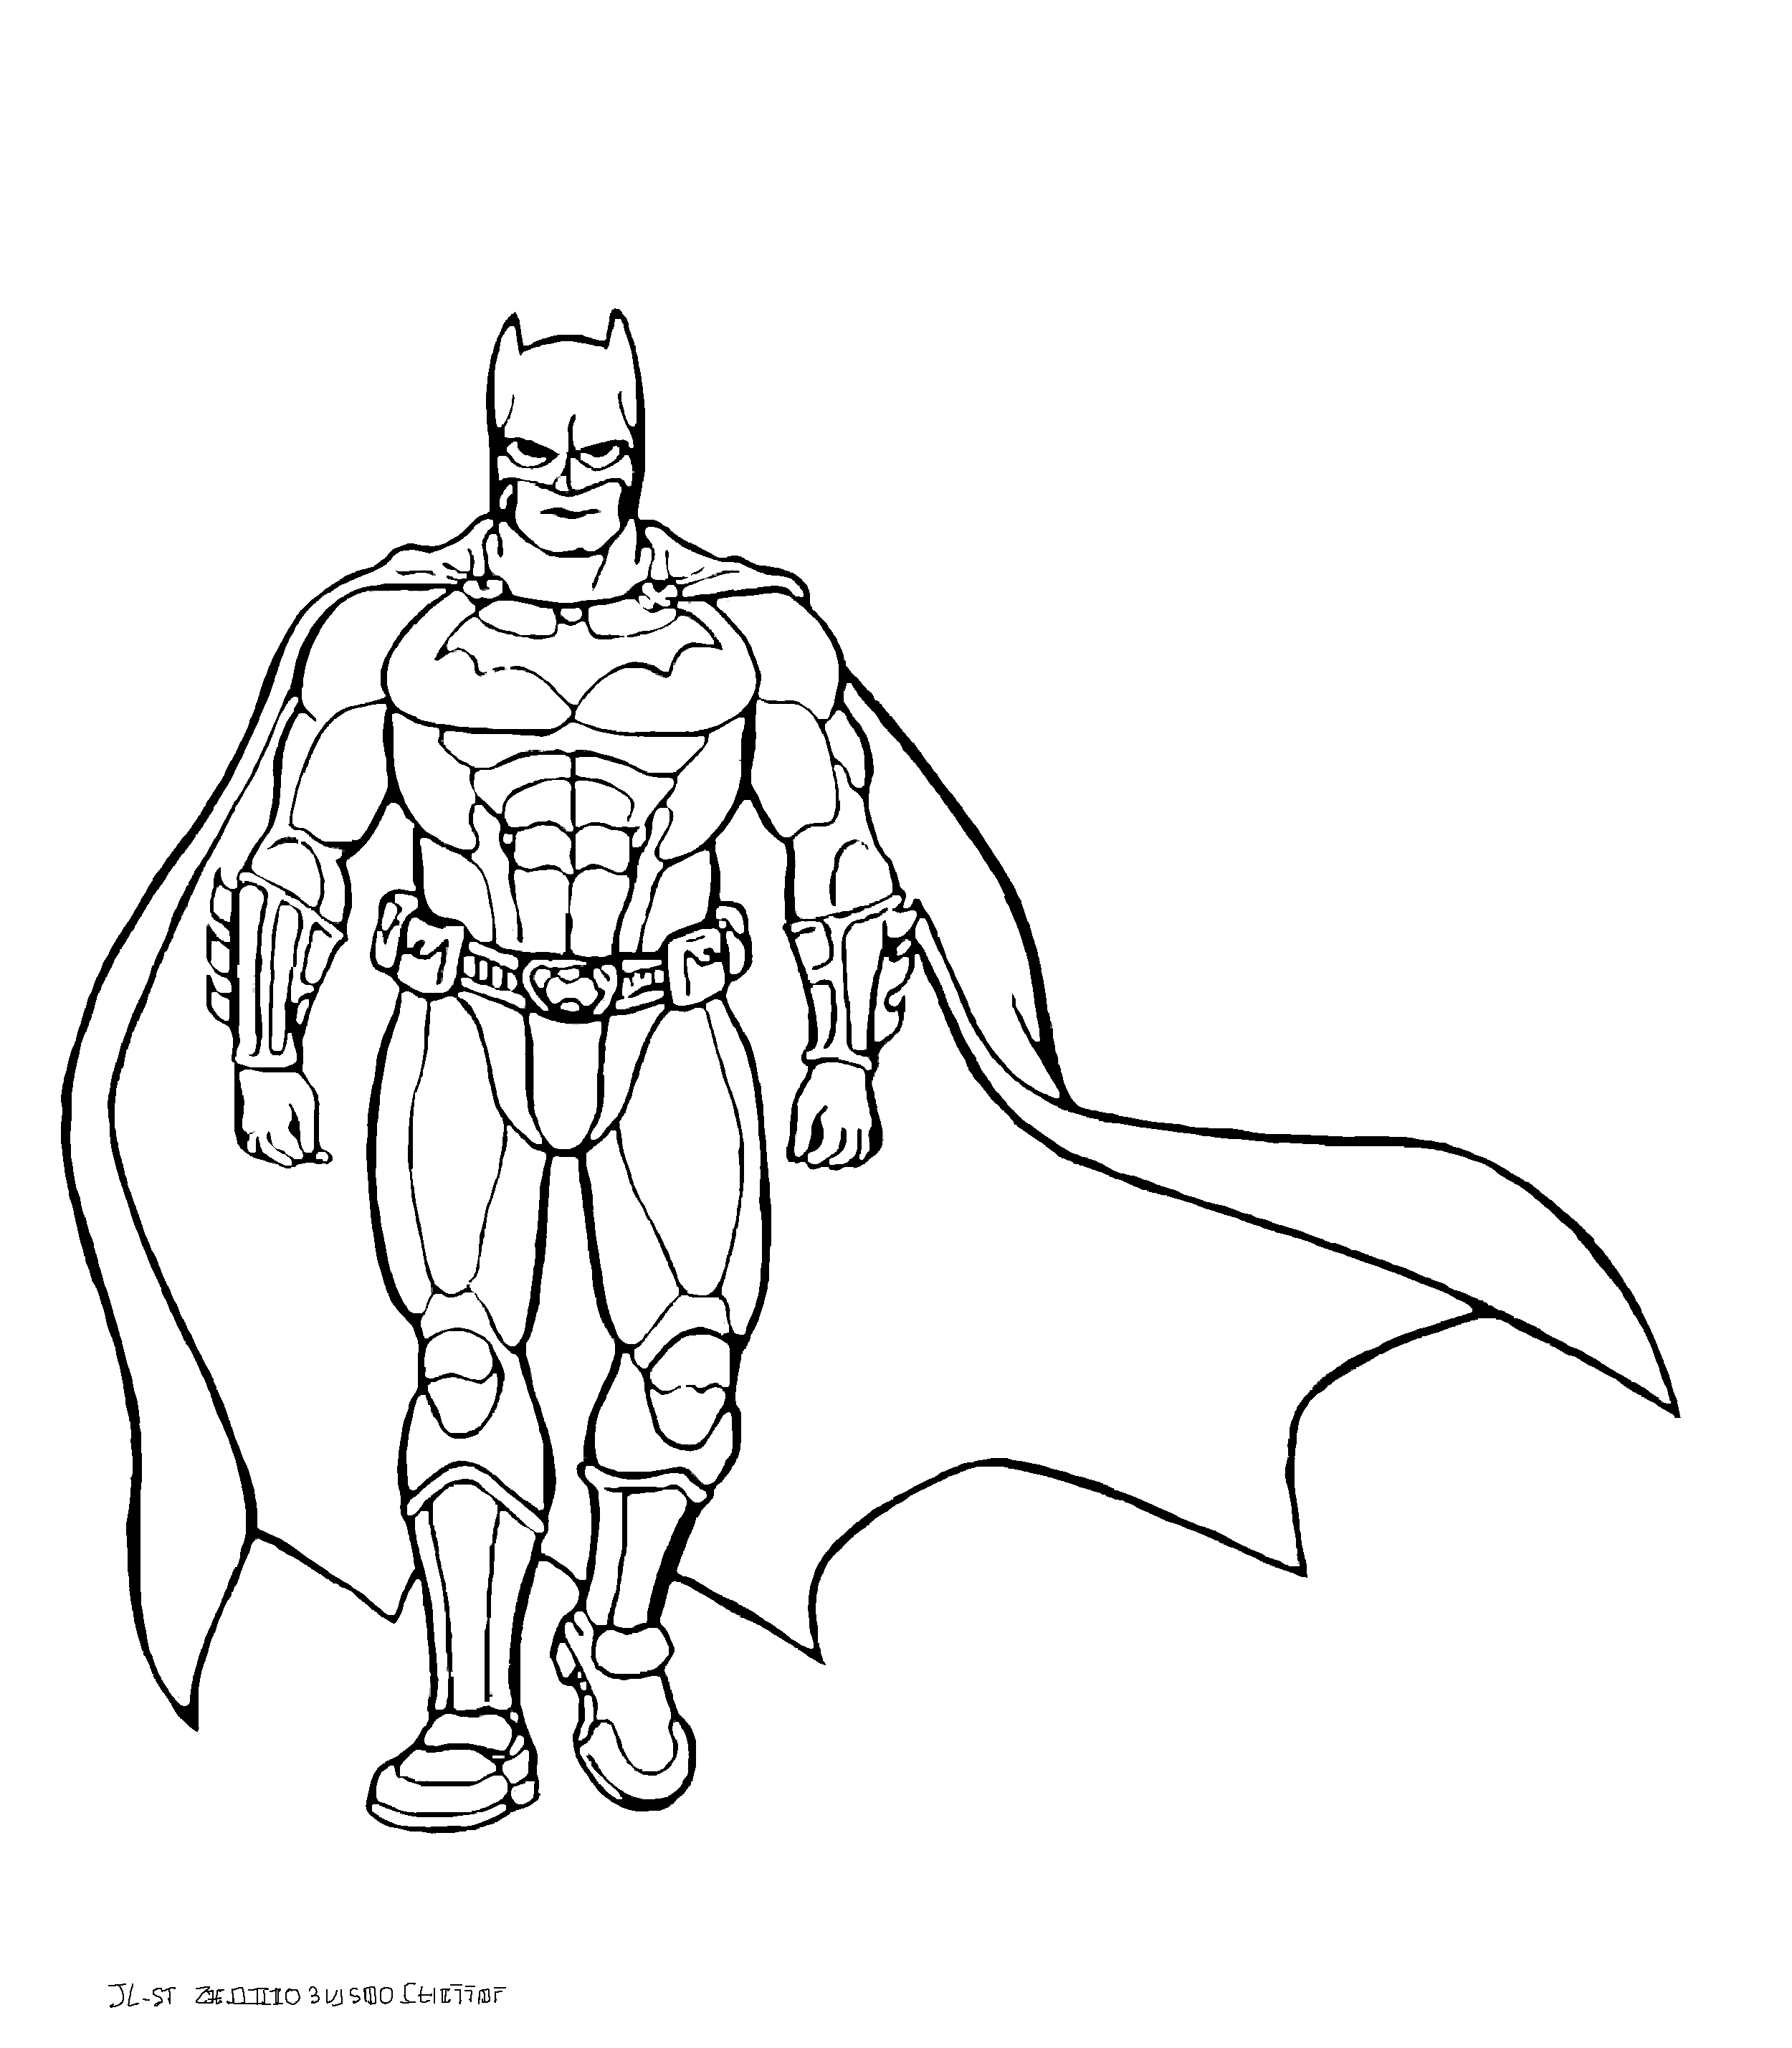 Batman and his cape in the wind - Batman Kids Coloring Pages